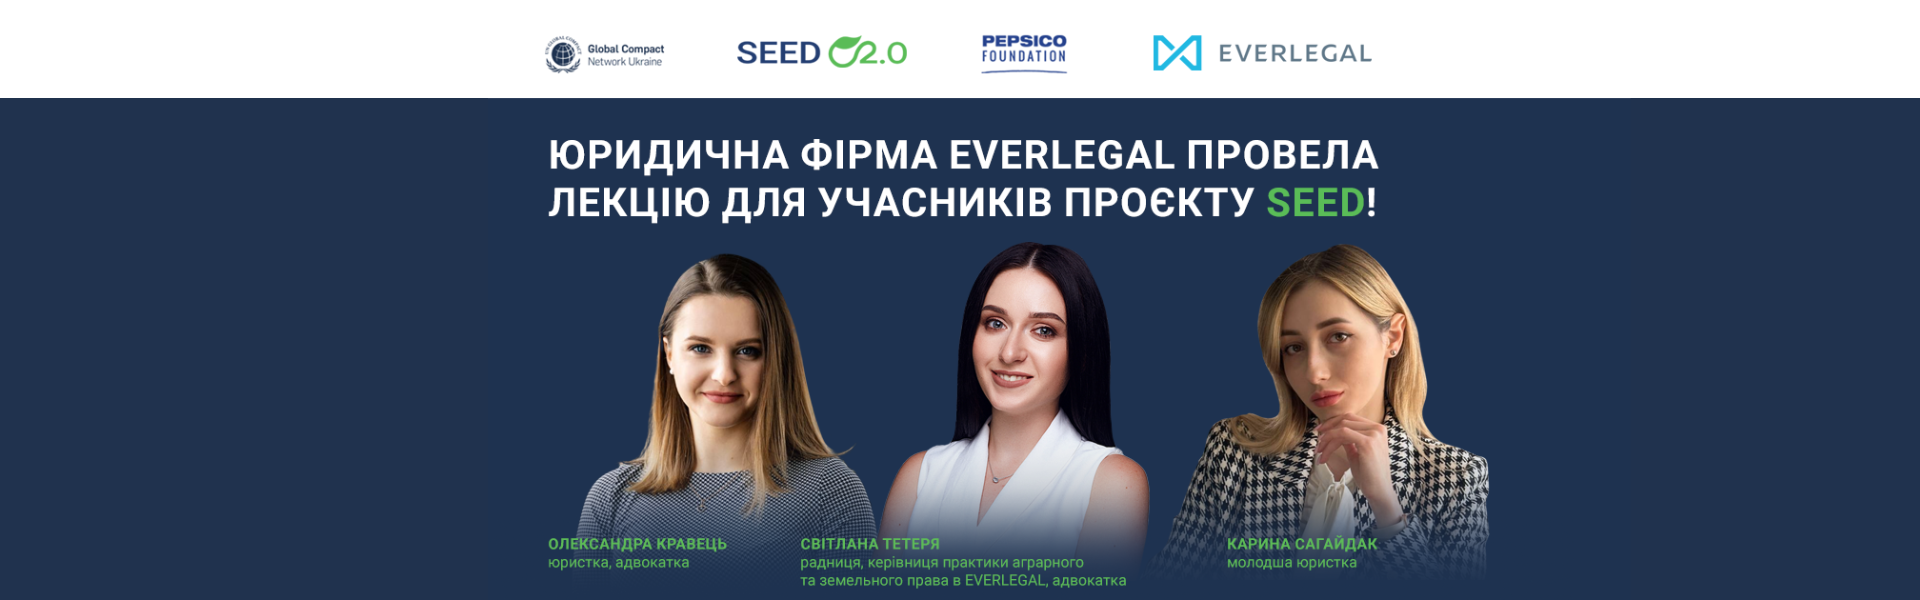 EVERLEGAL held a lecture for participants of the SEED 2.0 project of the UN Global Compact in Ukraine